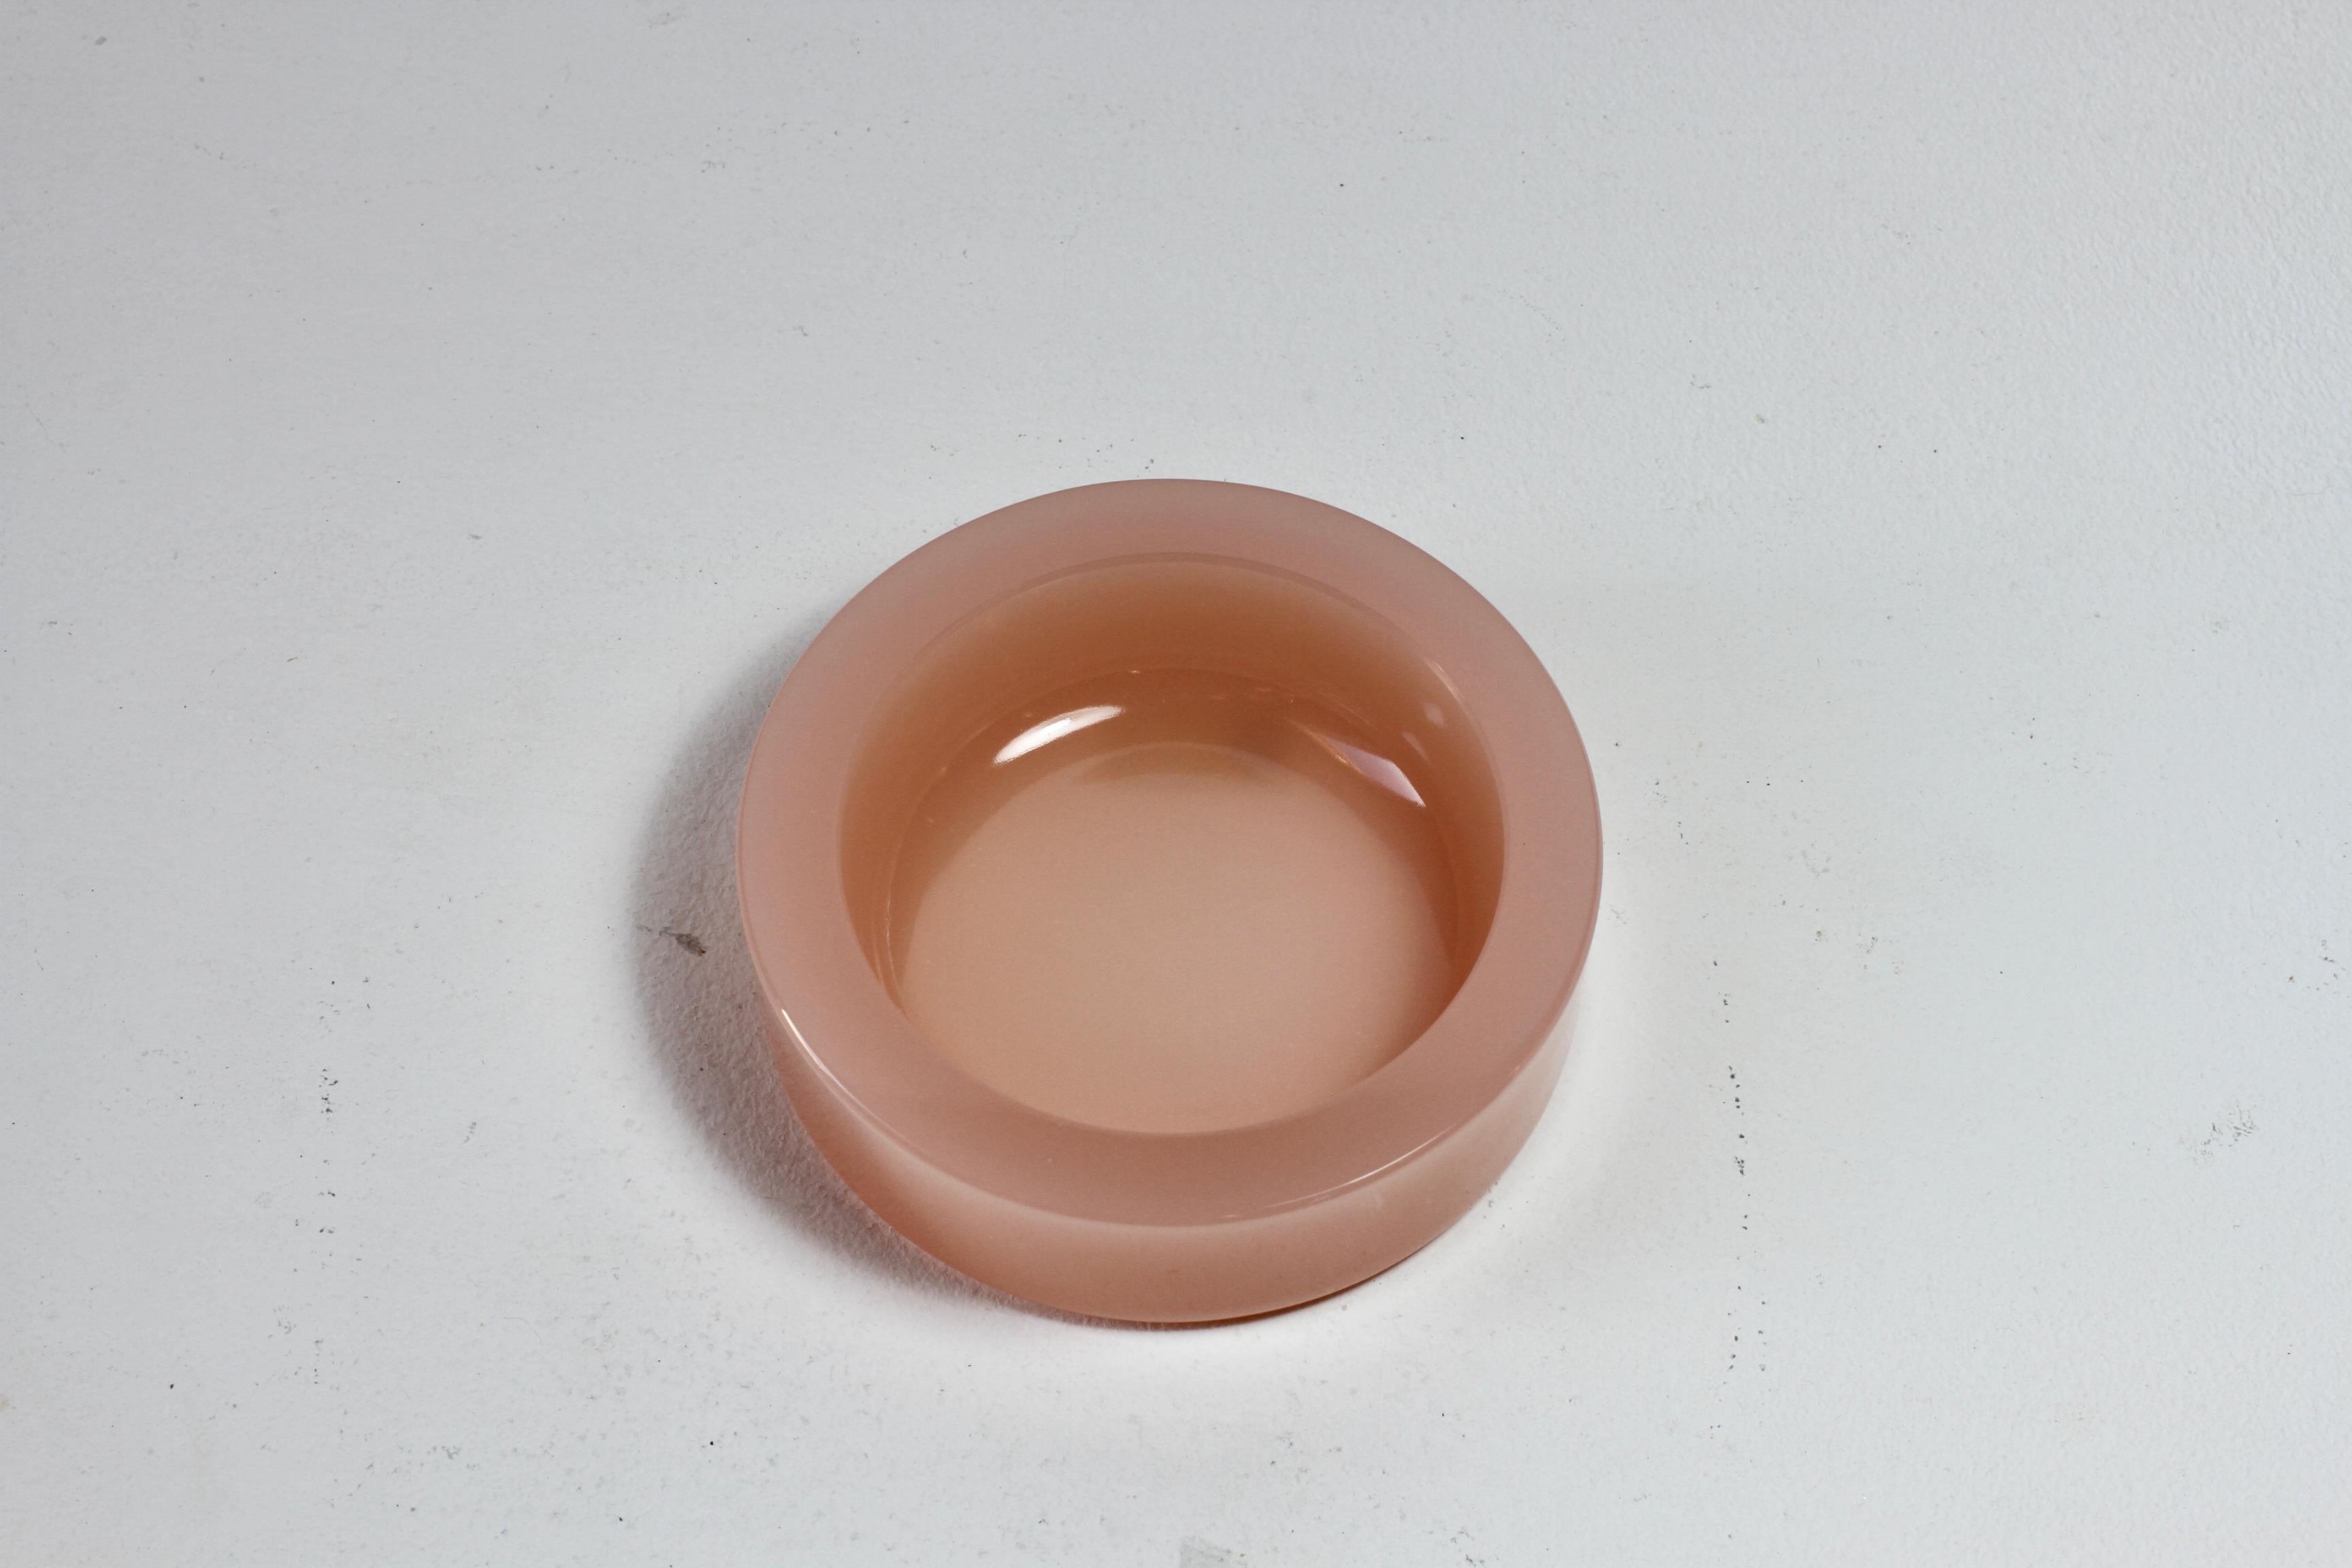 Cenedese Vintage Pink Opaline Murano Glass Dishes, Bowls or Ashtrays 1970s For Sale 3